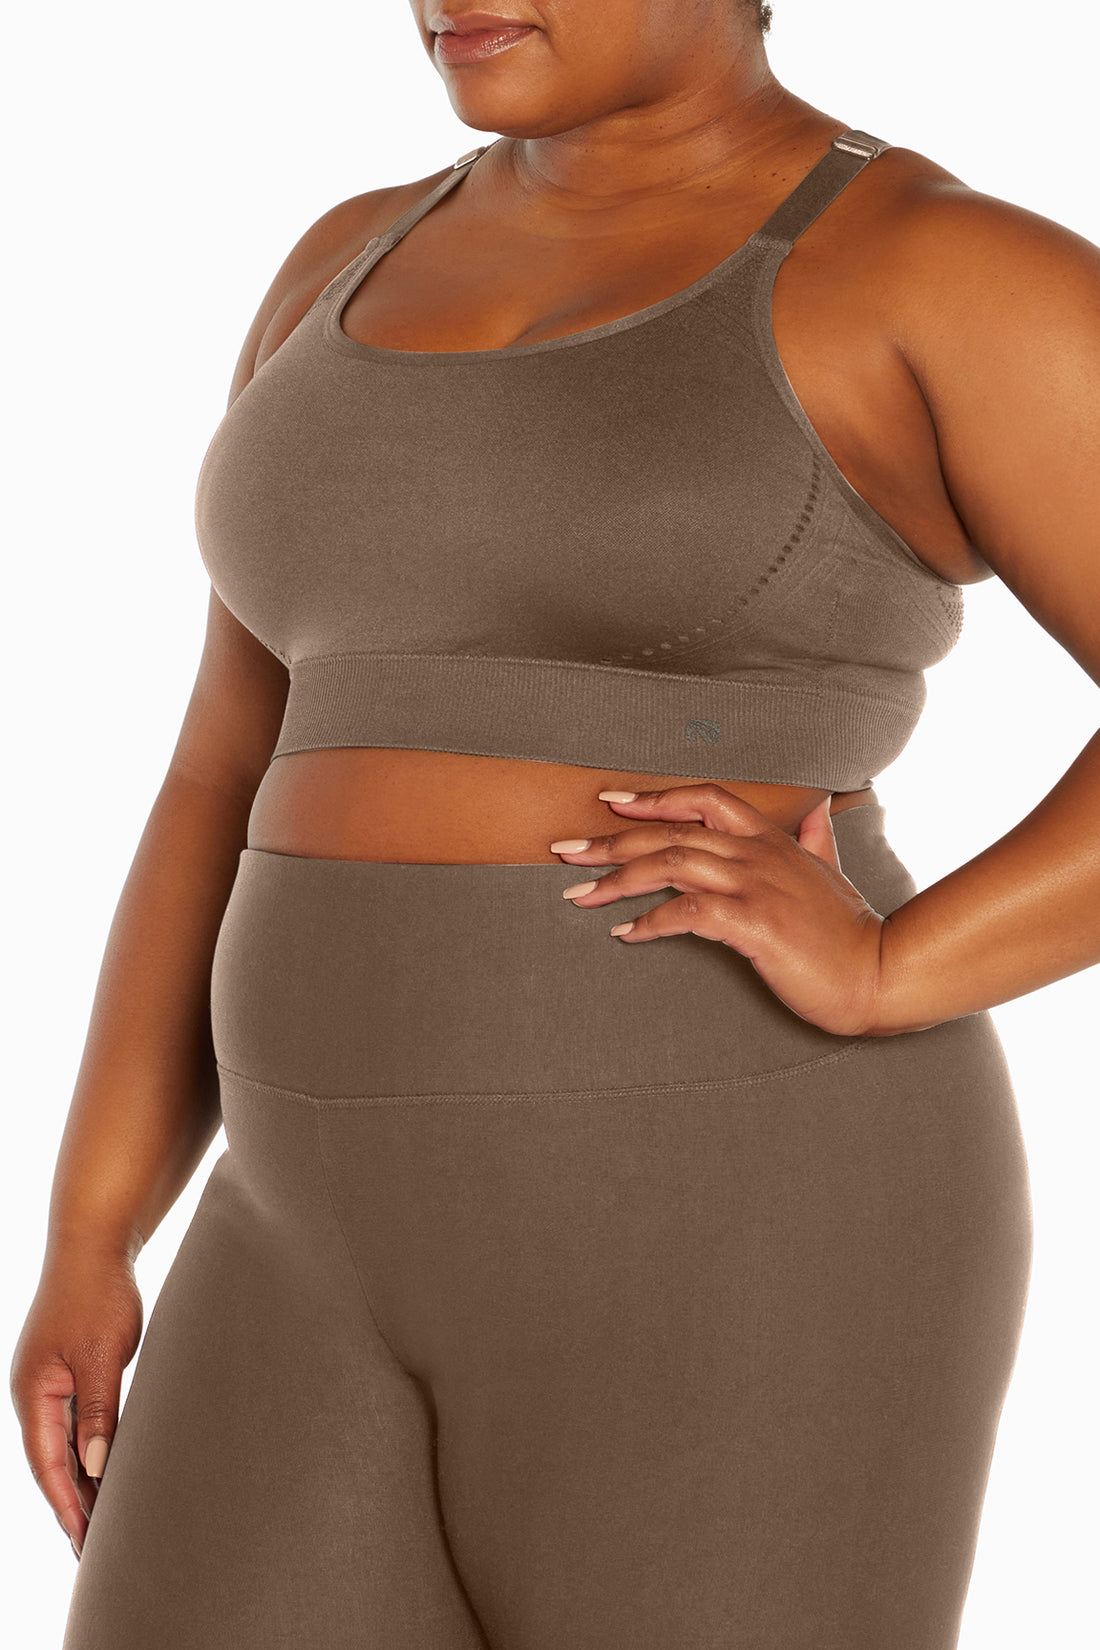 Rayon Plus Size Workout Clothes & Activewear